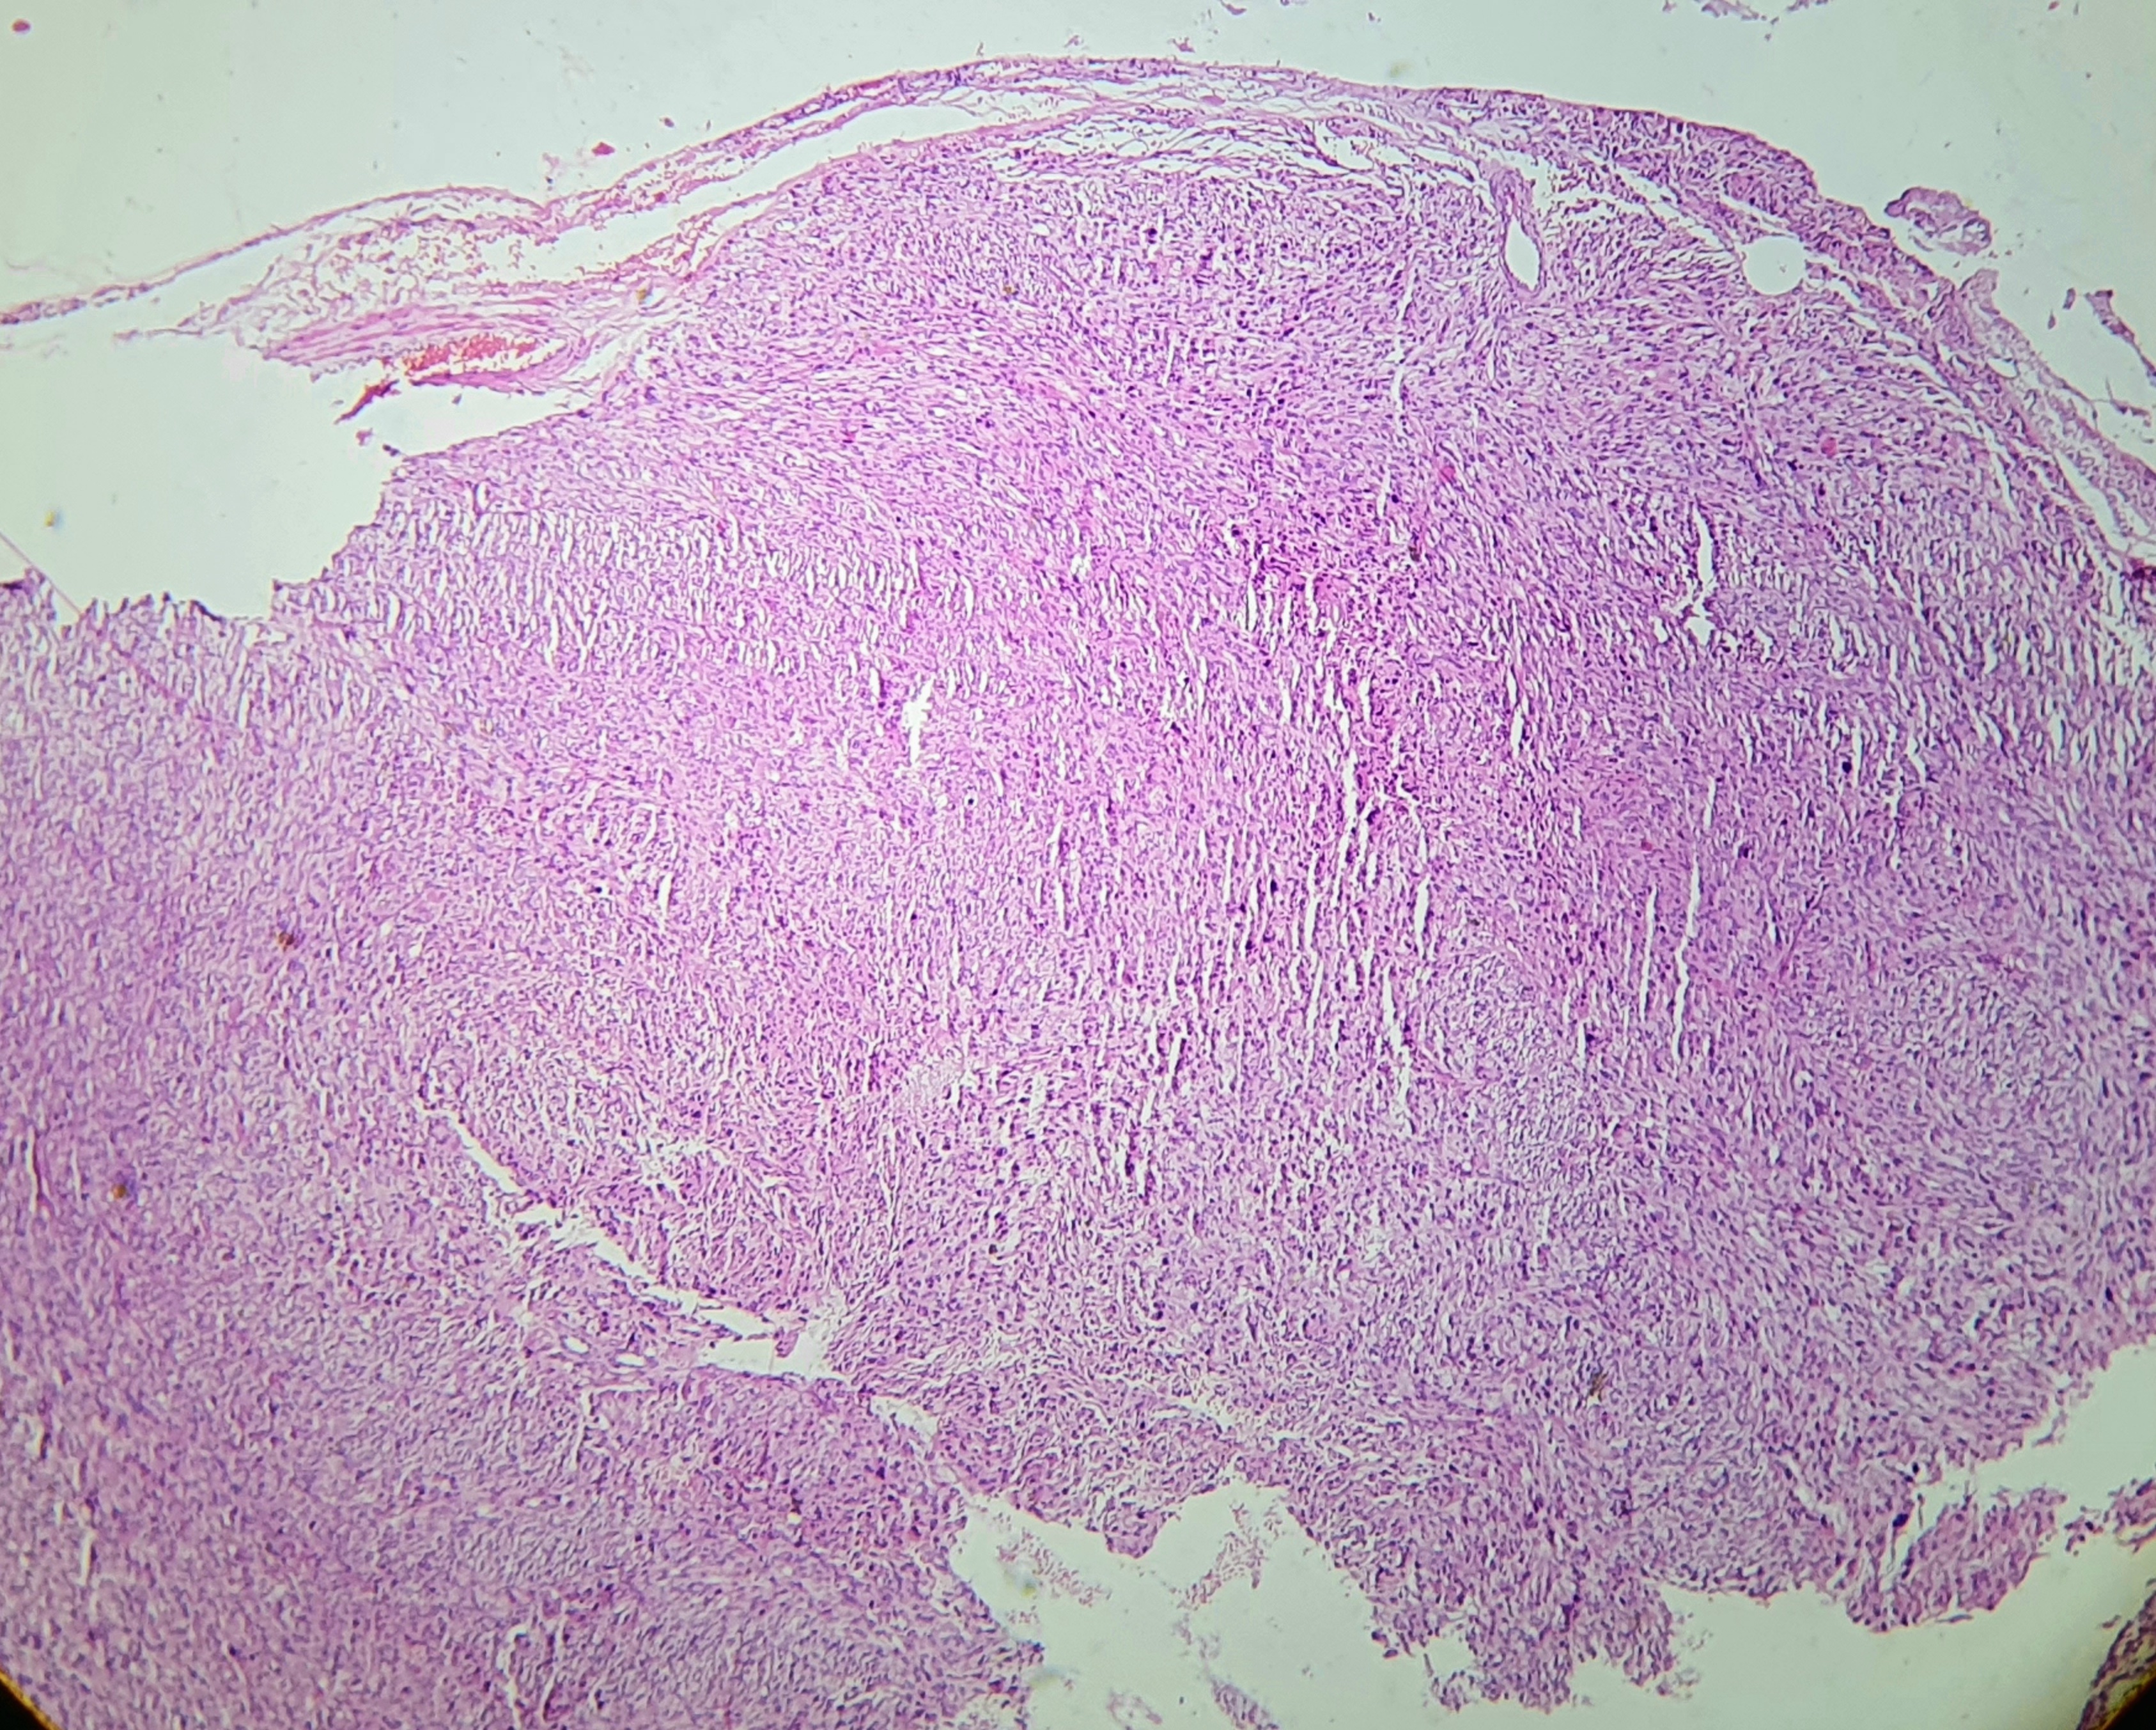 Undifferentiated pleomorphic sarcoma. Panoramic view shows an ill-defined dermal neoplasm extending to adipose tissue.